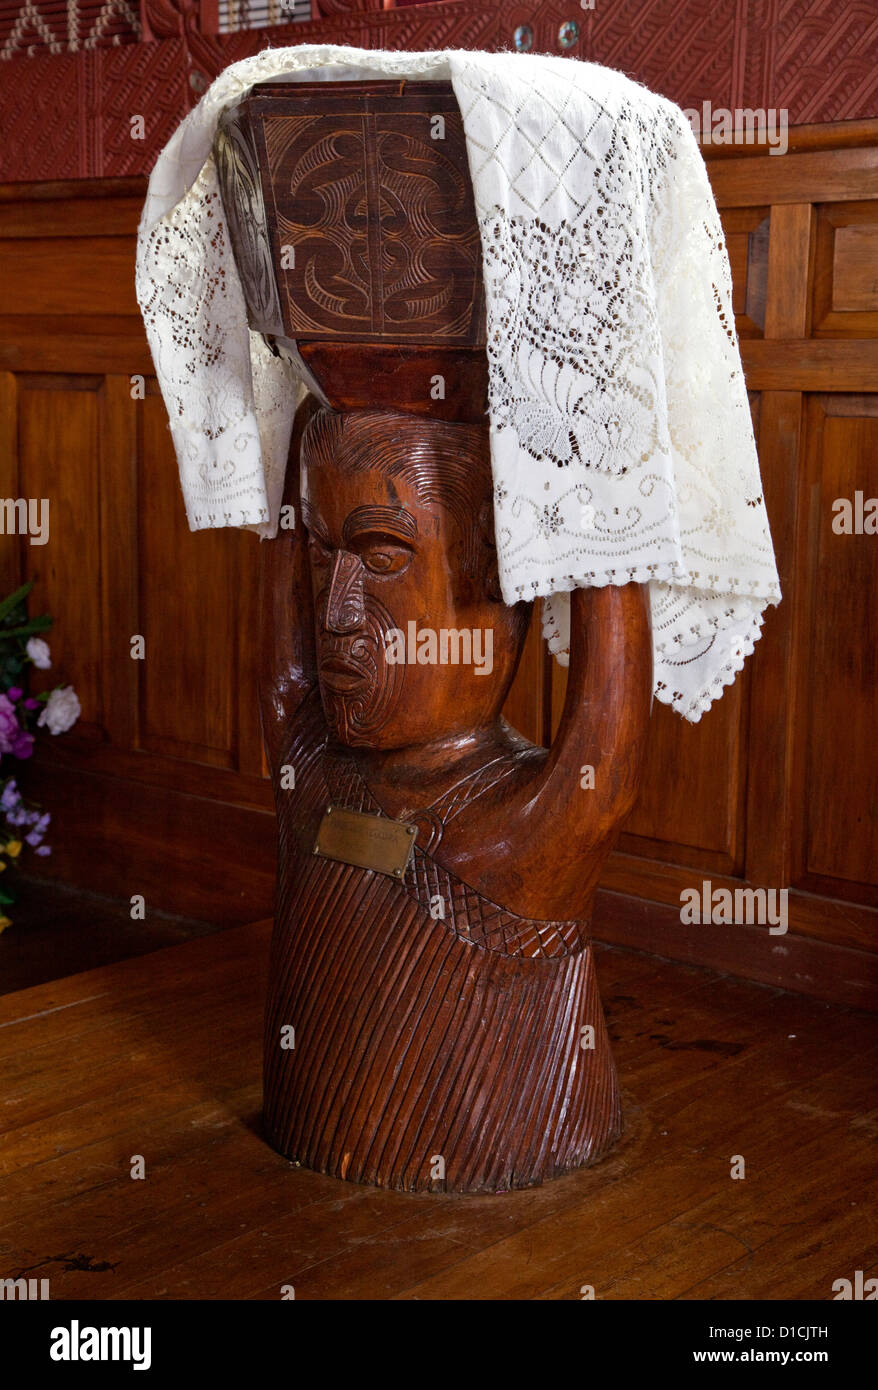 Baptismal Font, St. Mary's Anglican Church, Tikitiki, New Zealand.  Cultural Syncretism. Stock Photo